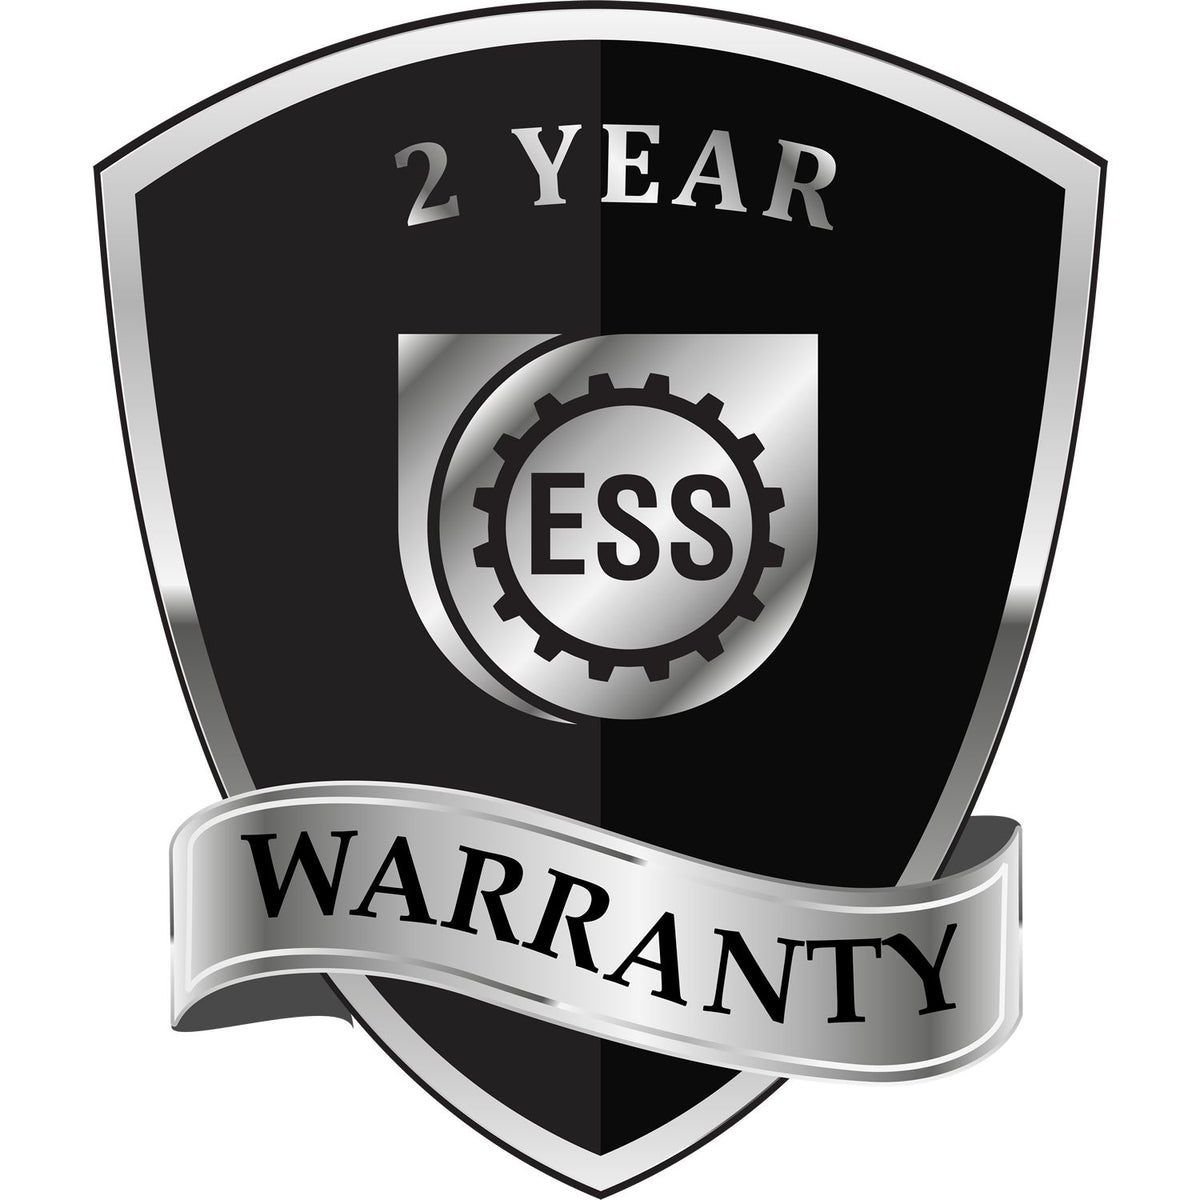 A badge or emblem showing a warranty icon for the New Mexico Desk Architect Embossing Seal